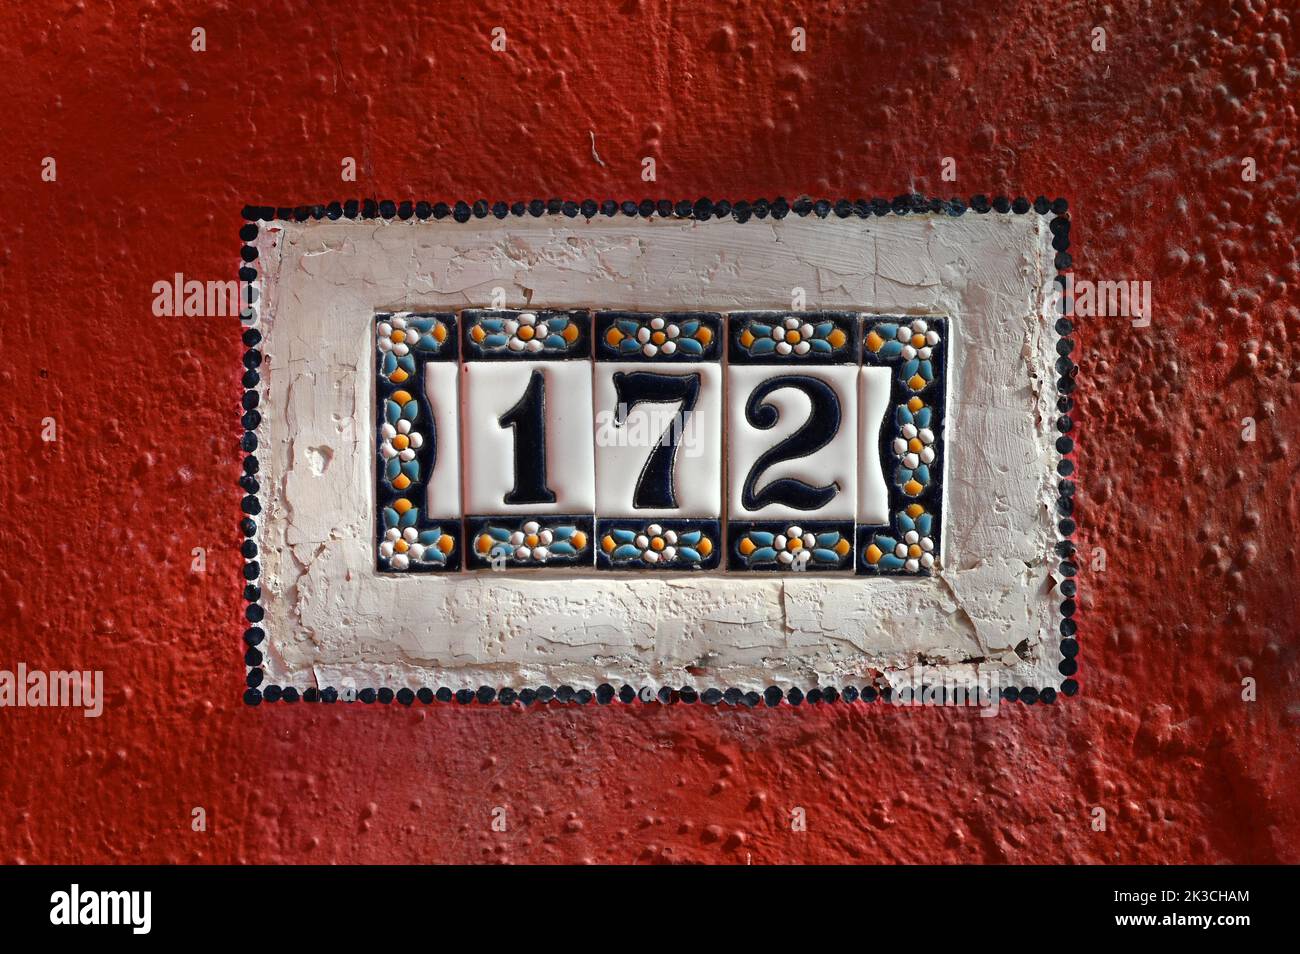 Vintage 172 number plate made of ceramic pieces and attached to crumbling red wall of house Stock Photo